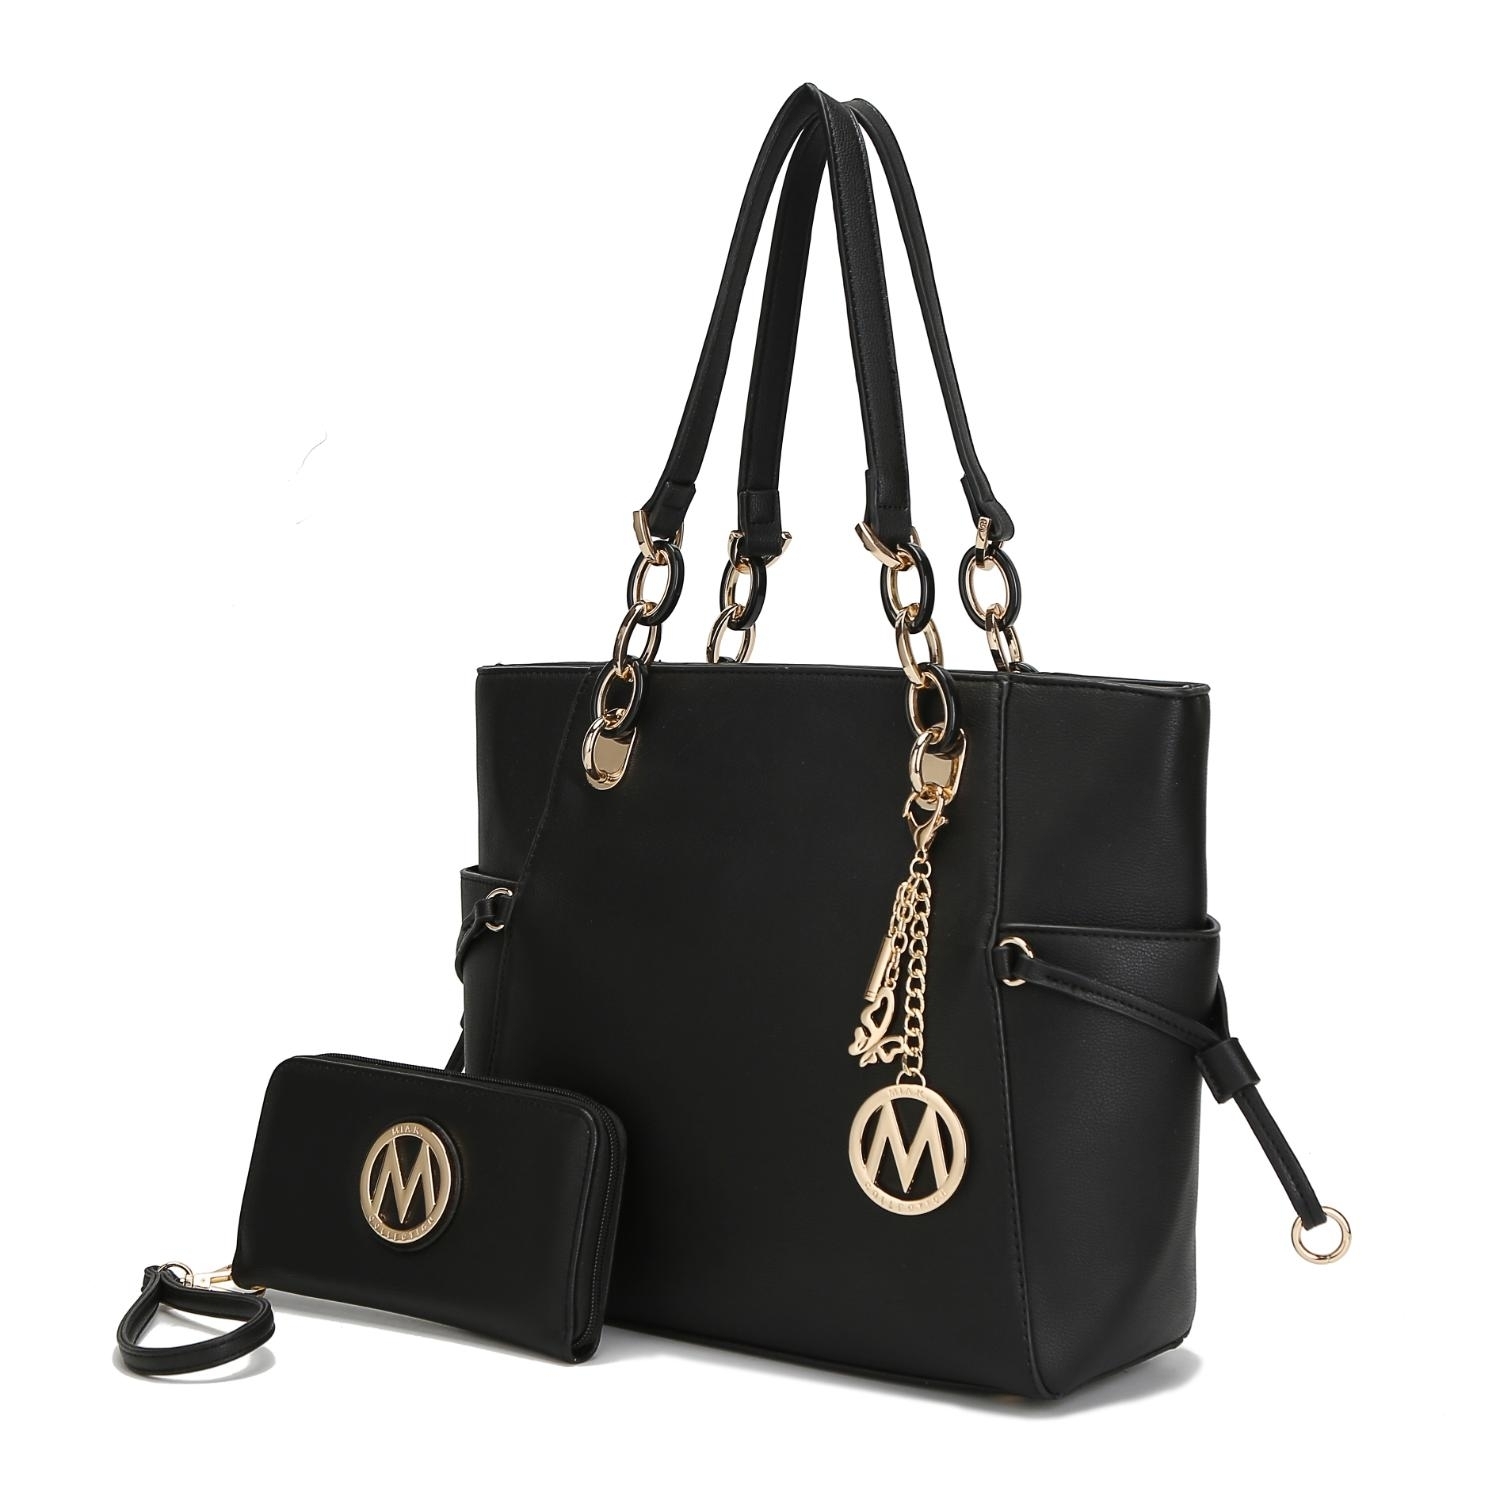 MKF Collection Yale Tote Handbag With Wallet By Mia K. - Black